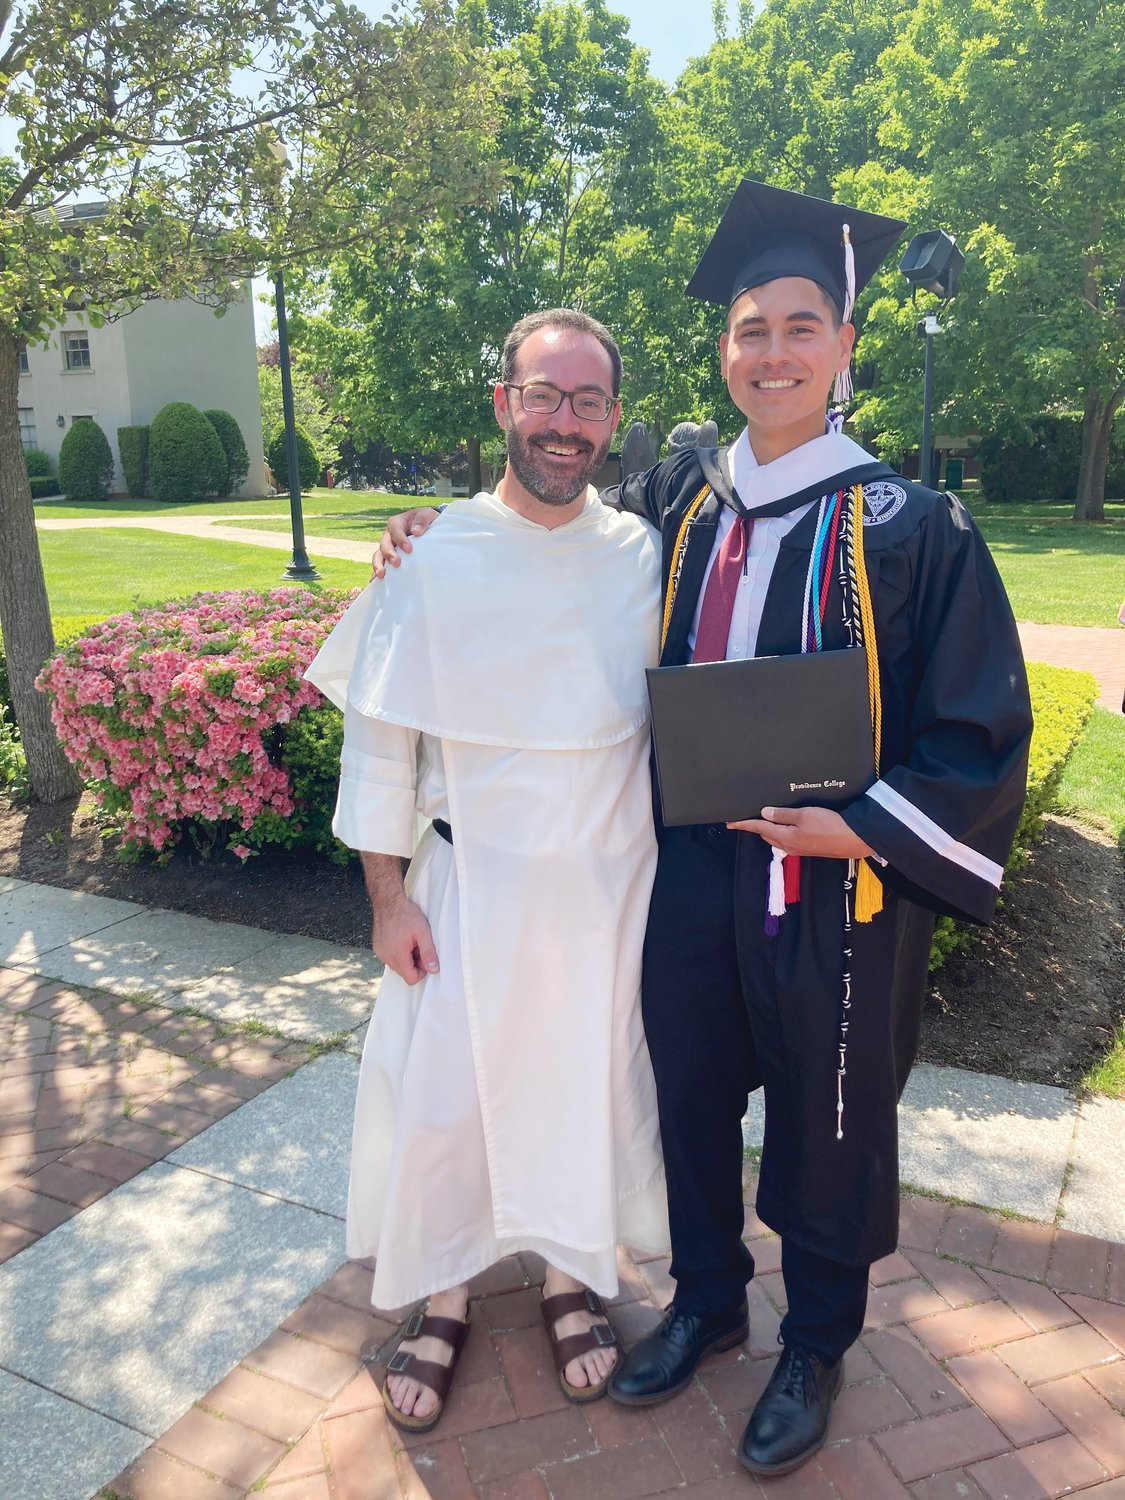 Trevor Wakefield stands with one of his Dominican mentors, Father Michael Weibley, O.P., at his Providence College commencement in 2021.